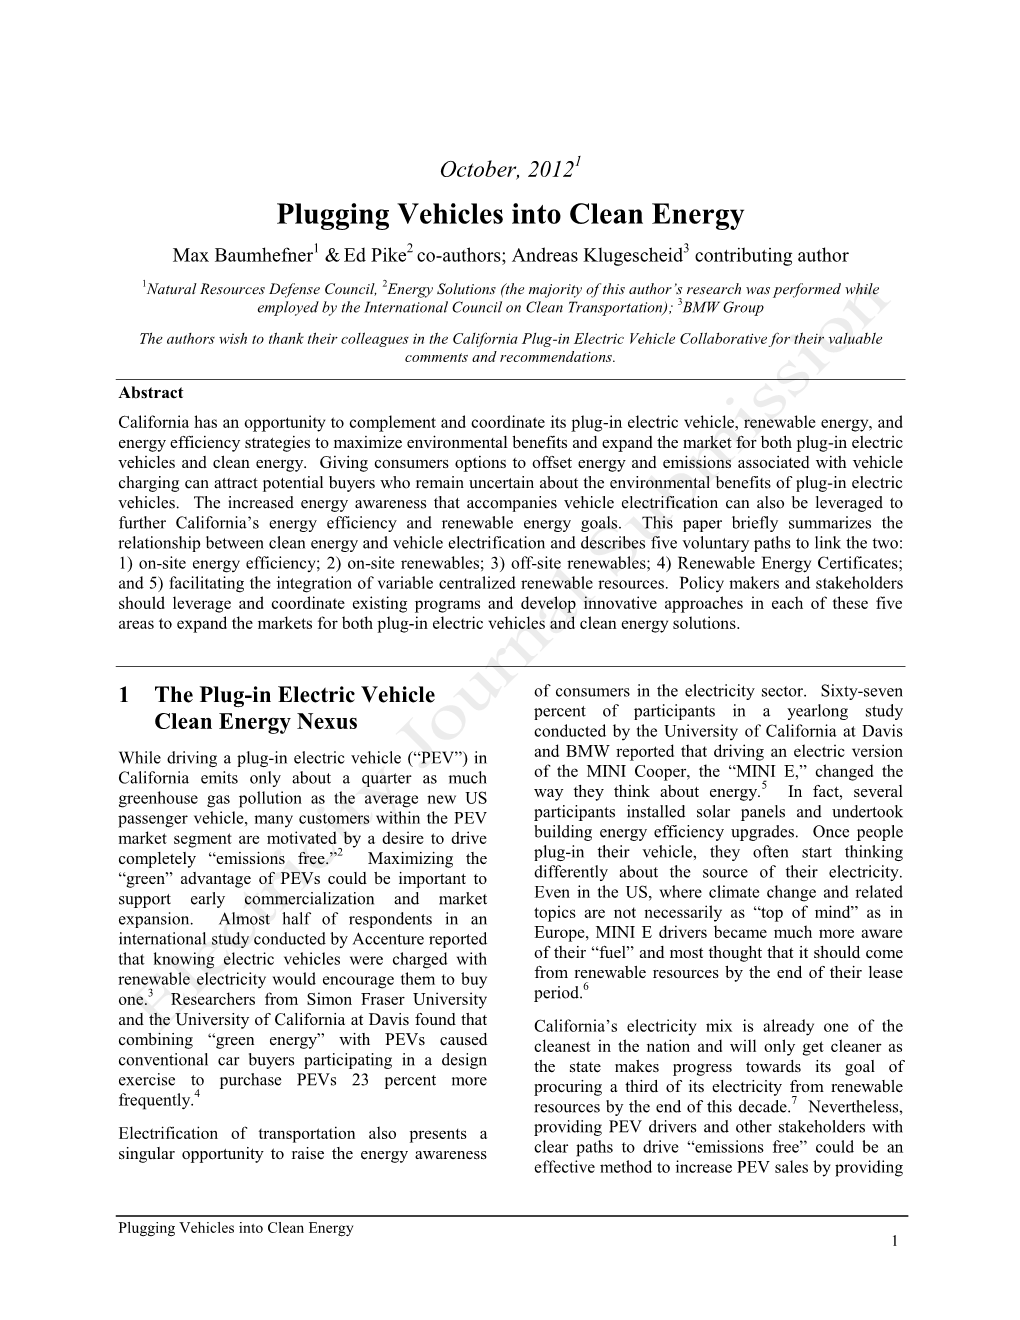 Plugging Vehicles Into Clean Energy Max Baumhefner1 & Ed Pike2 Co-Authors; Andreas Klugescheid3 Contributing Author